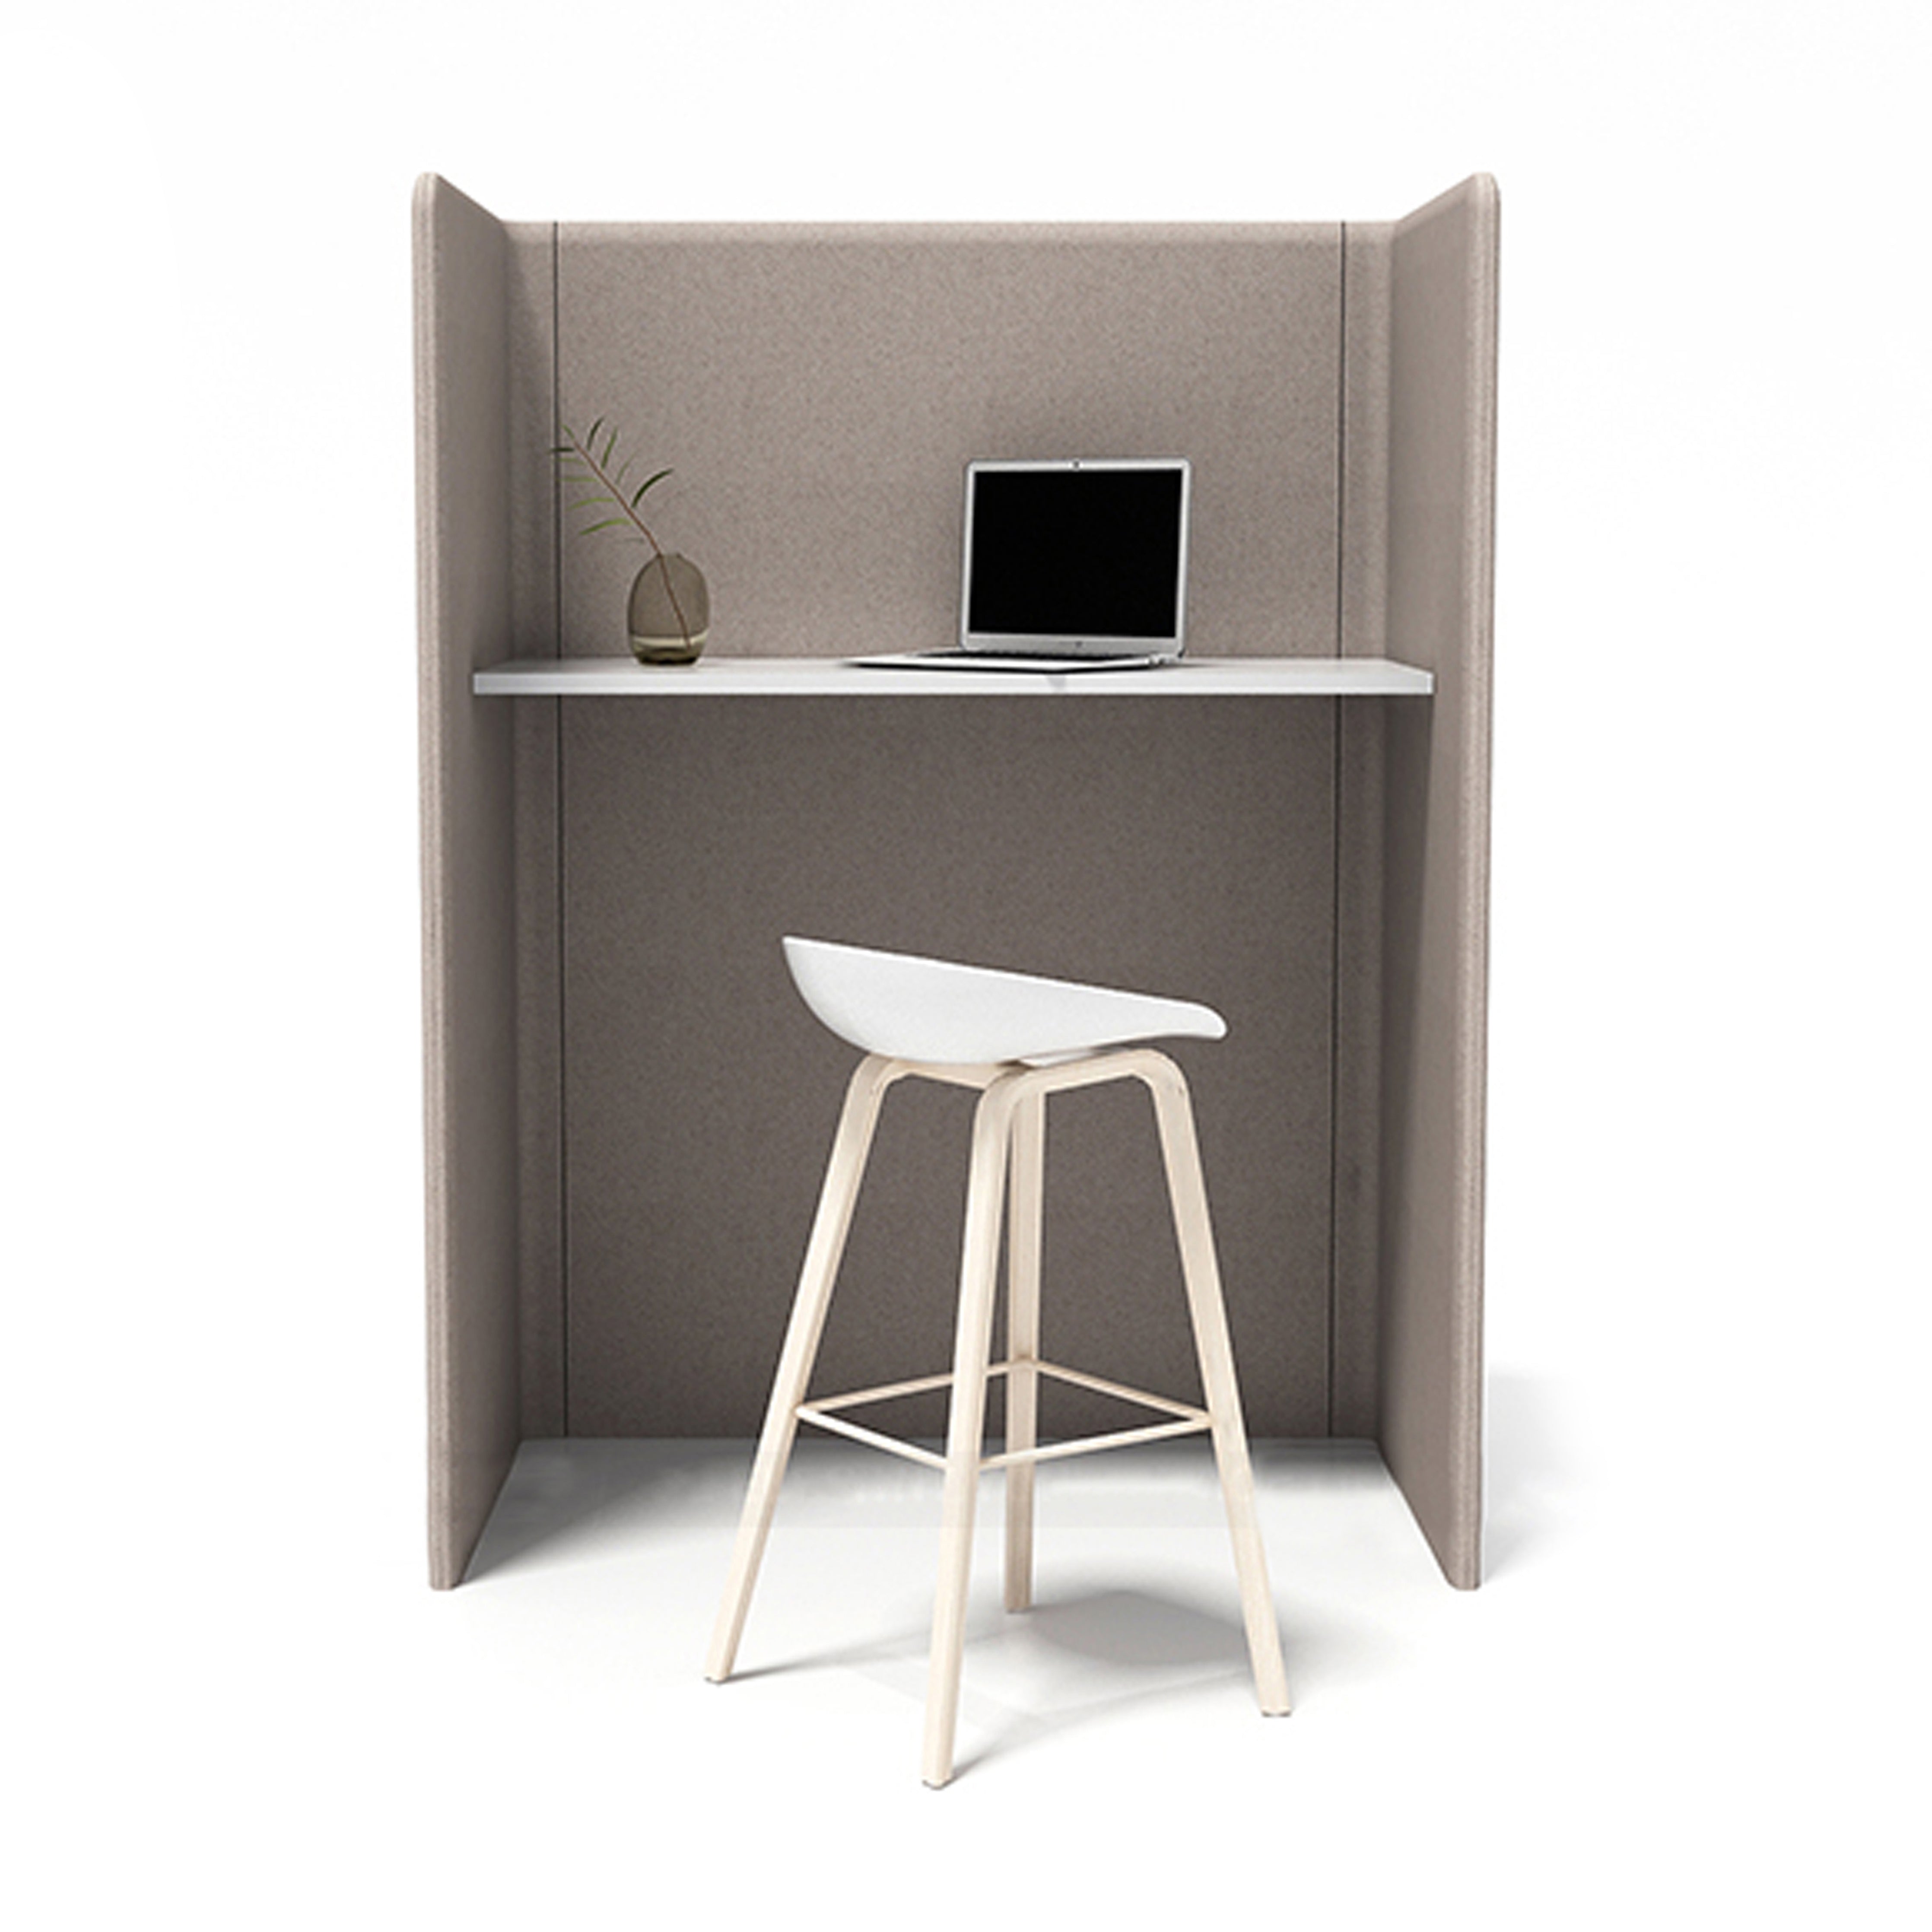 Bequiet I - Privacy Pod Bar with Power Point